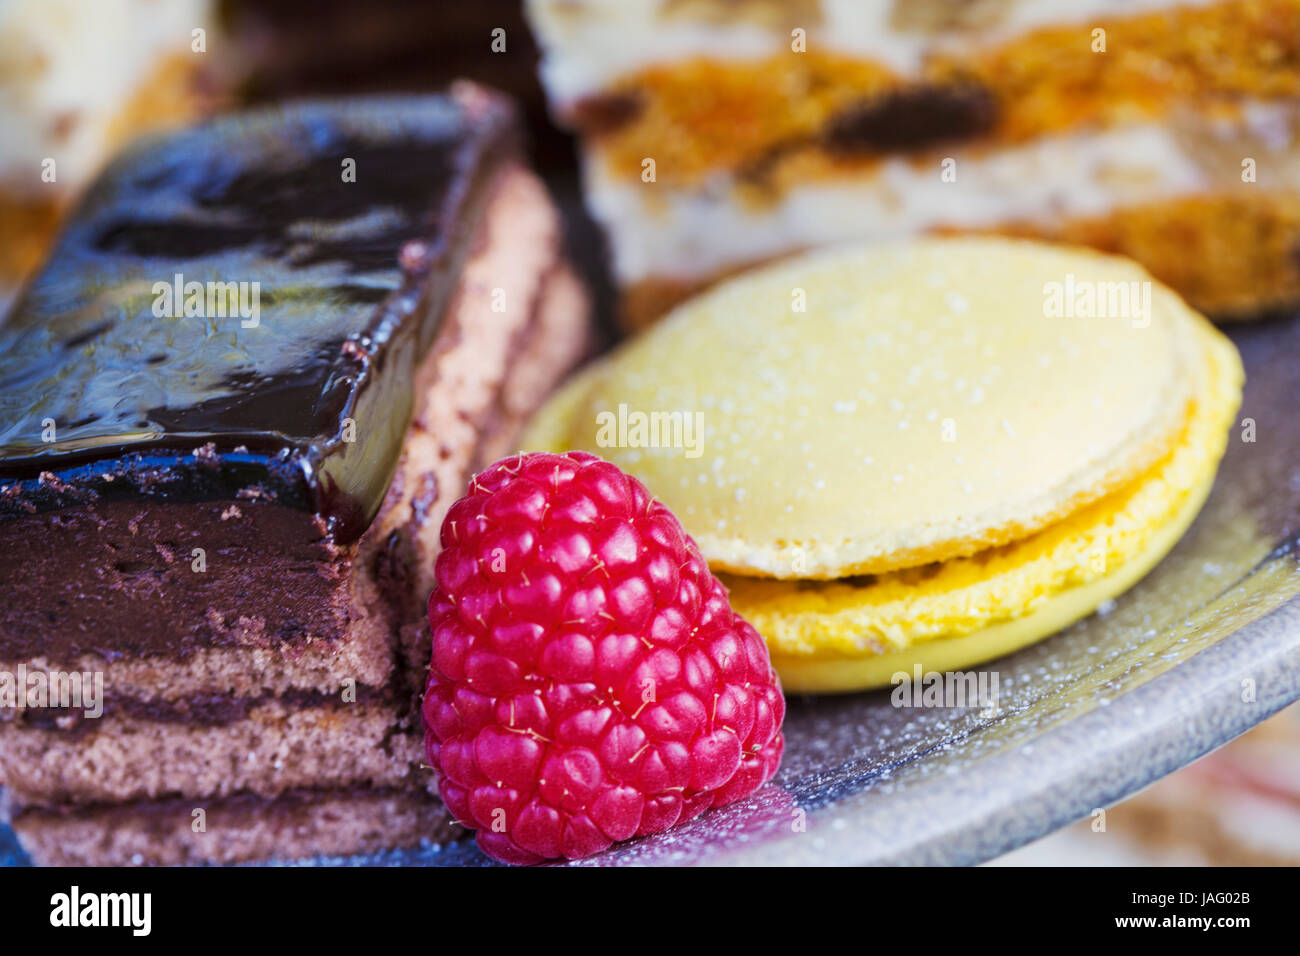 Close up of a selection of cakes, a macaroon and a raspberry on a plate, traditional afternoon tea. Stock Photo